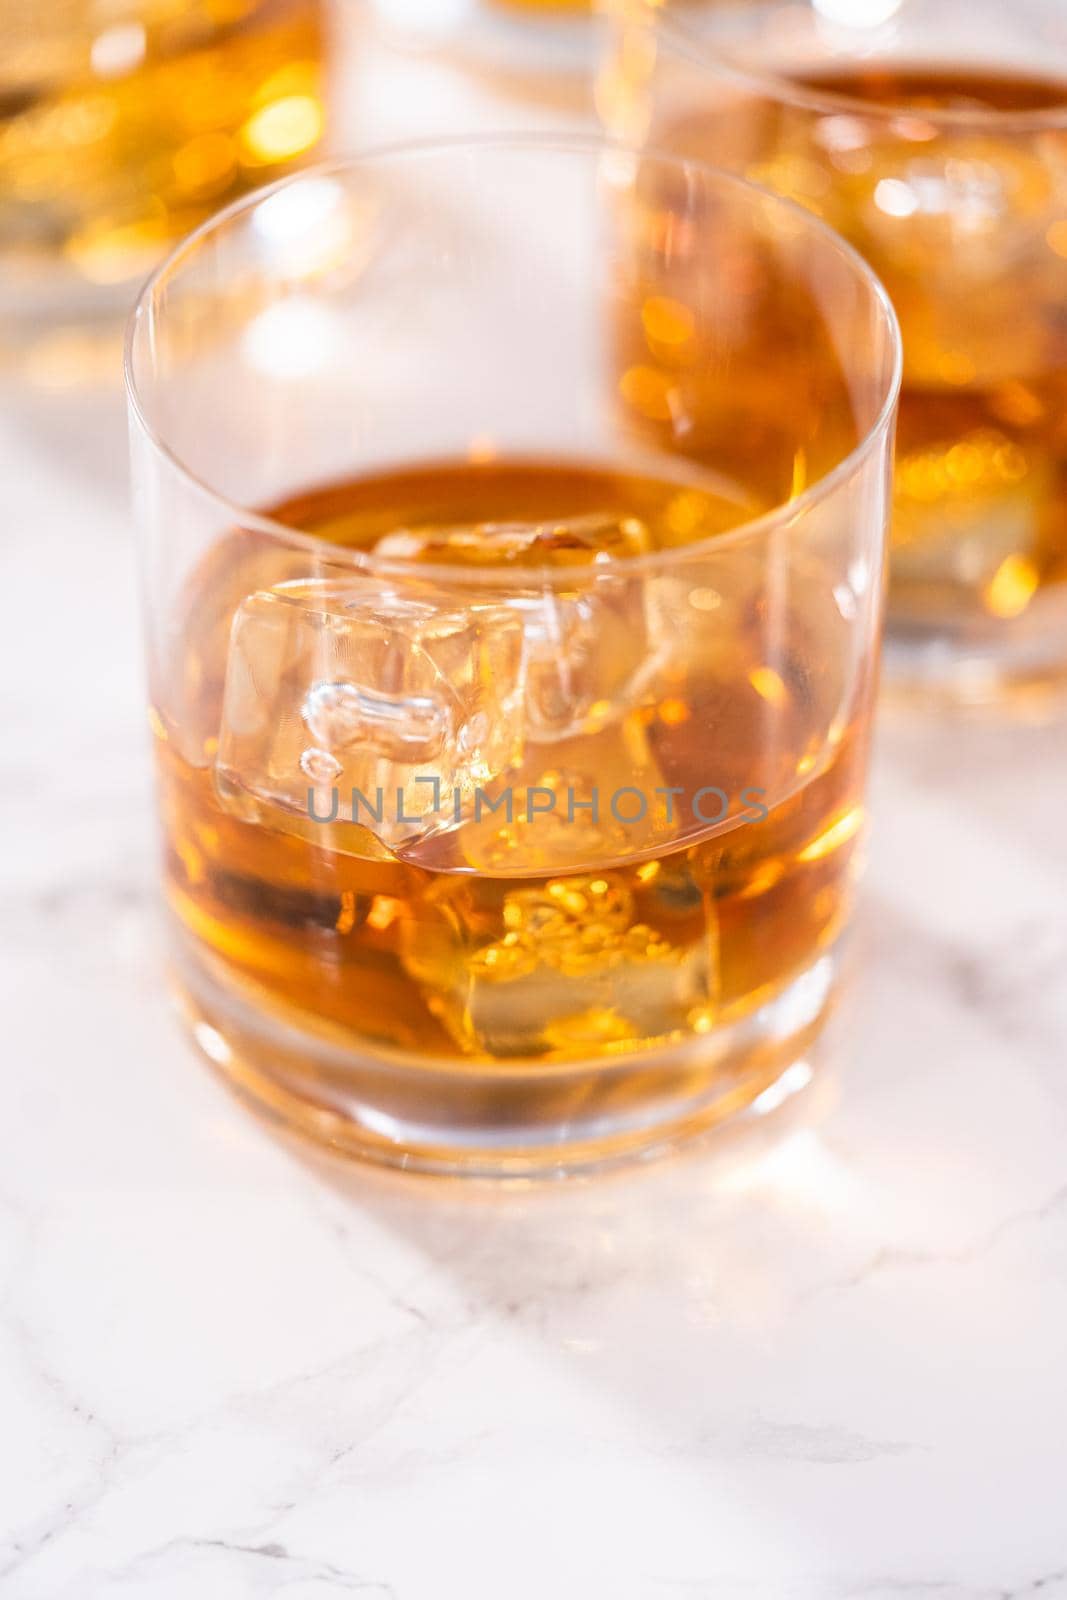 Scotch on the rocks in whiskey glass on a white marble surface.